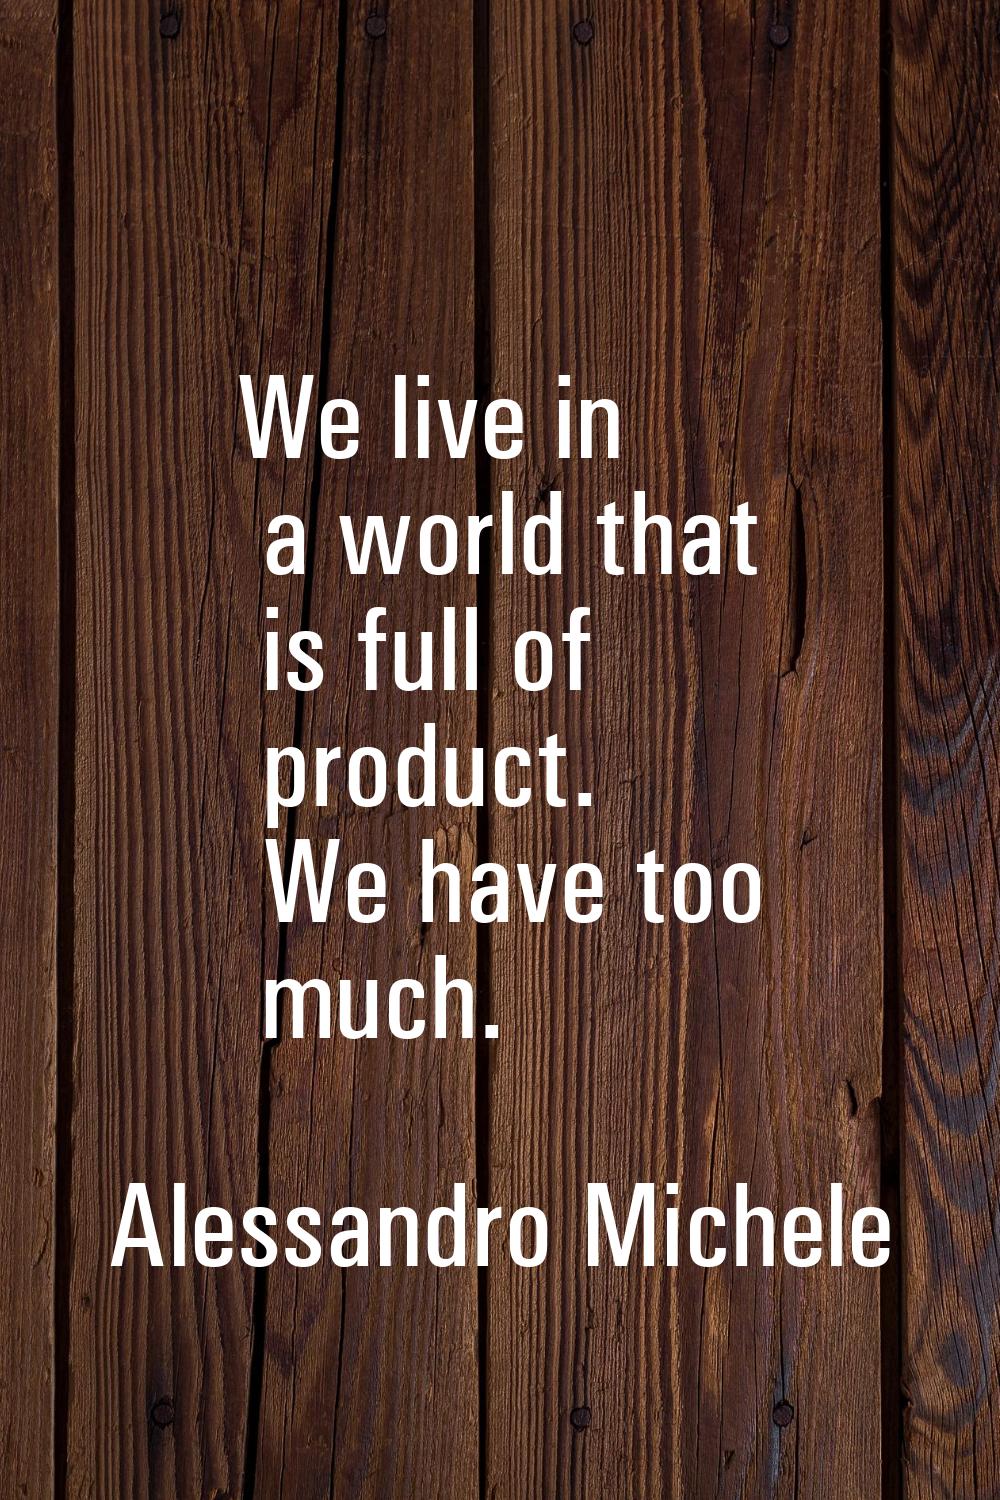 We live in a world that is full of product. We have too much.